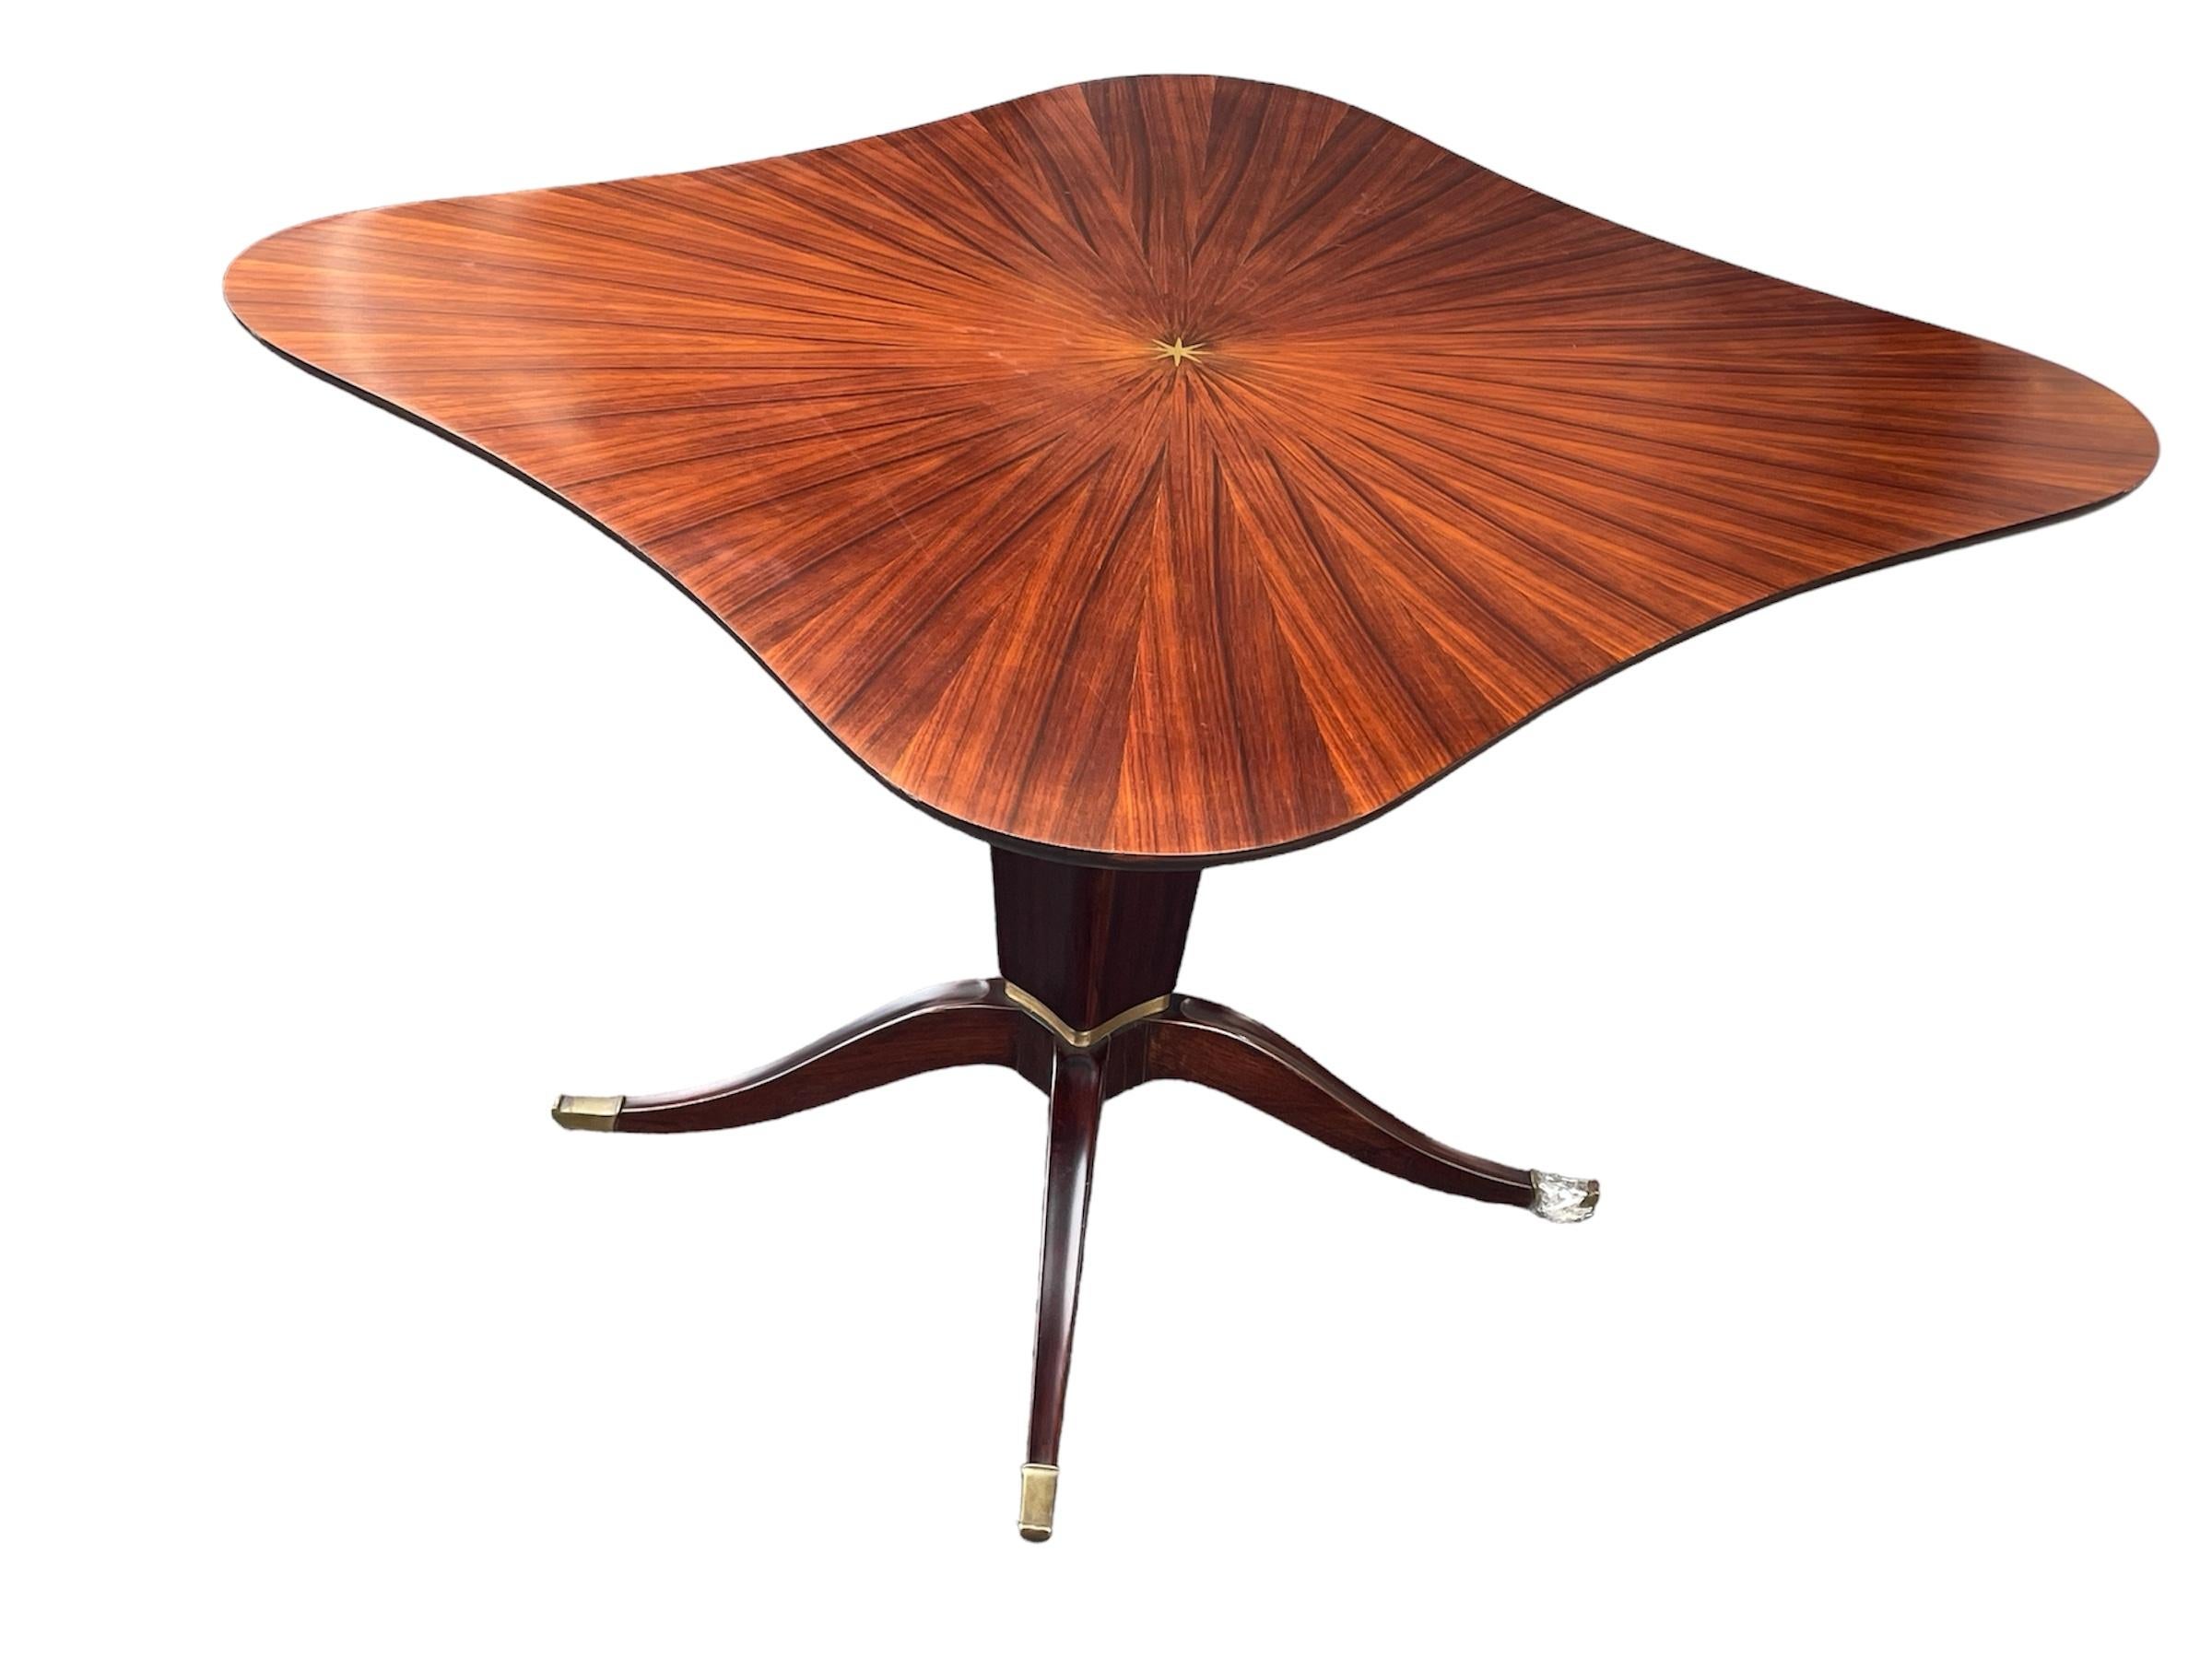 Polished Mid Century Vintage Italian Paolo Buffa Rosewood Dining Table Set Chairs 1950s For Sale